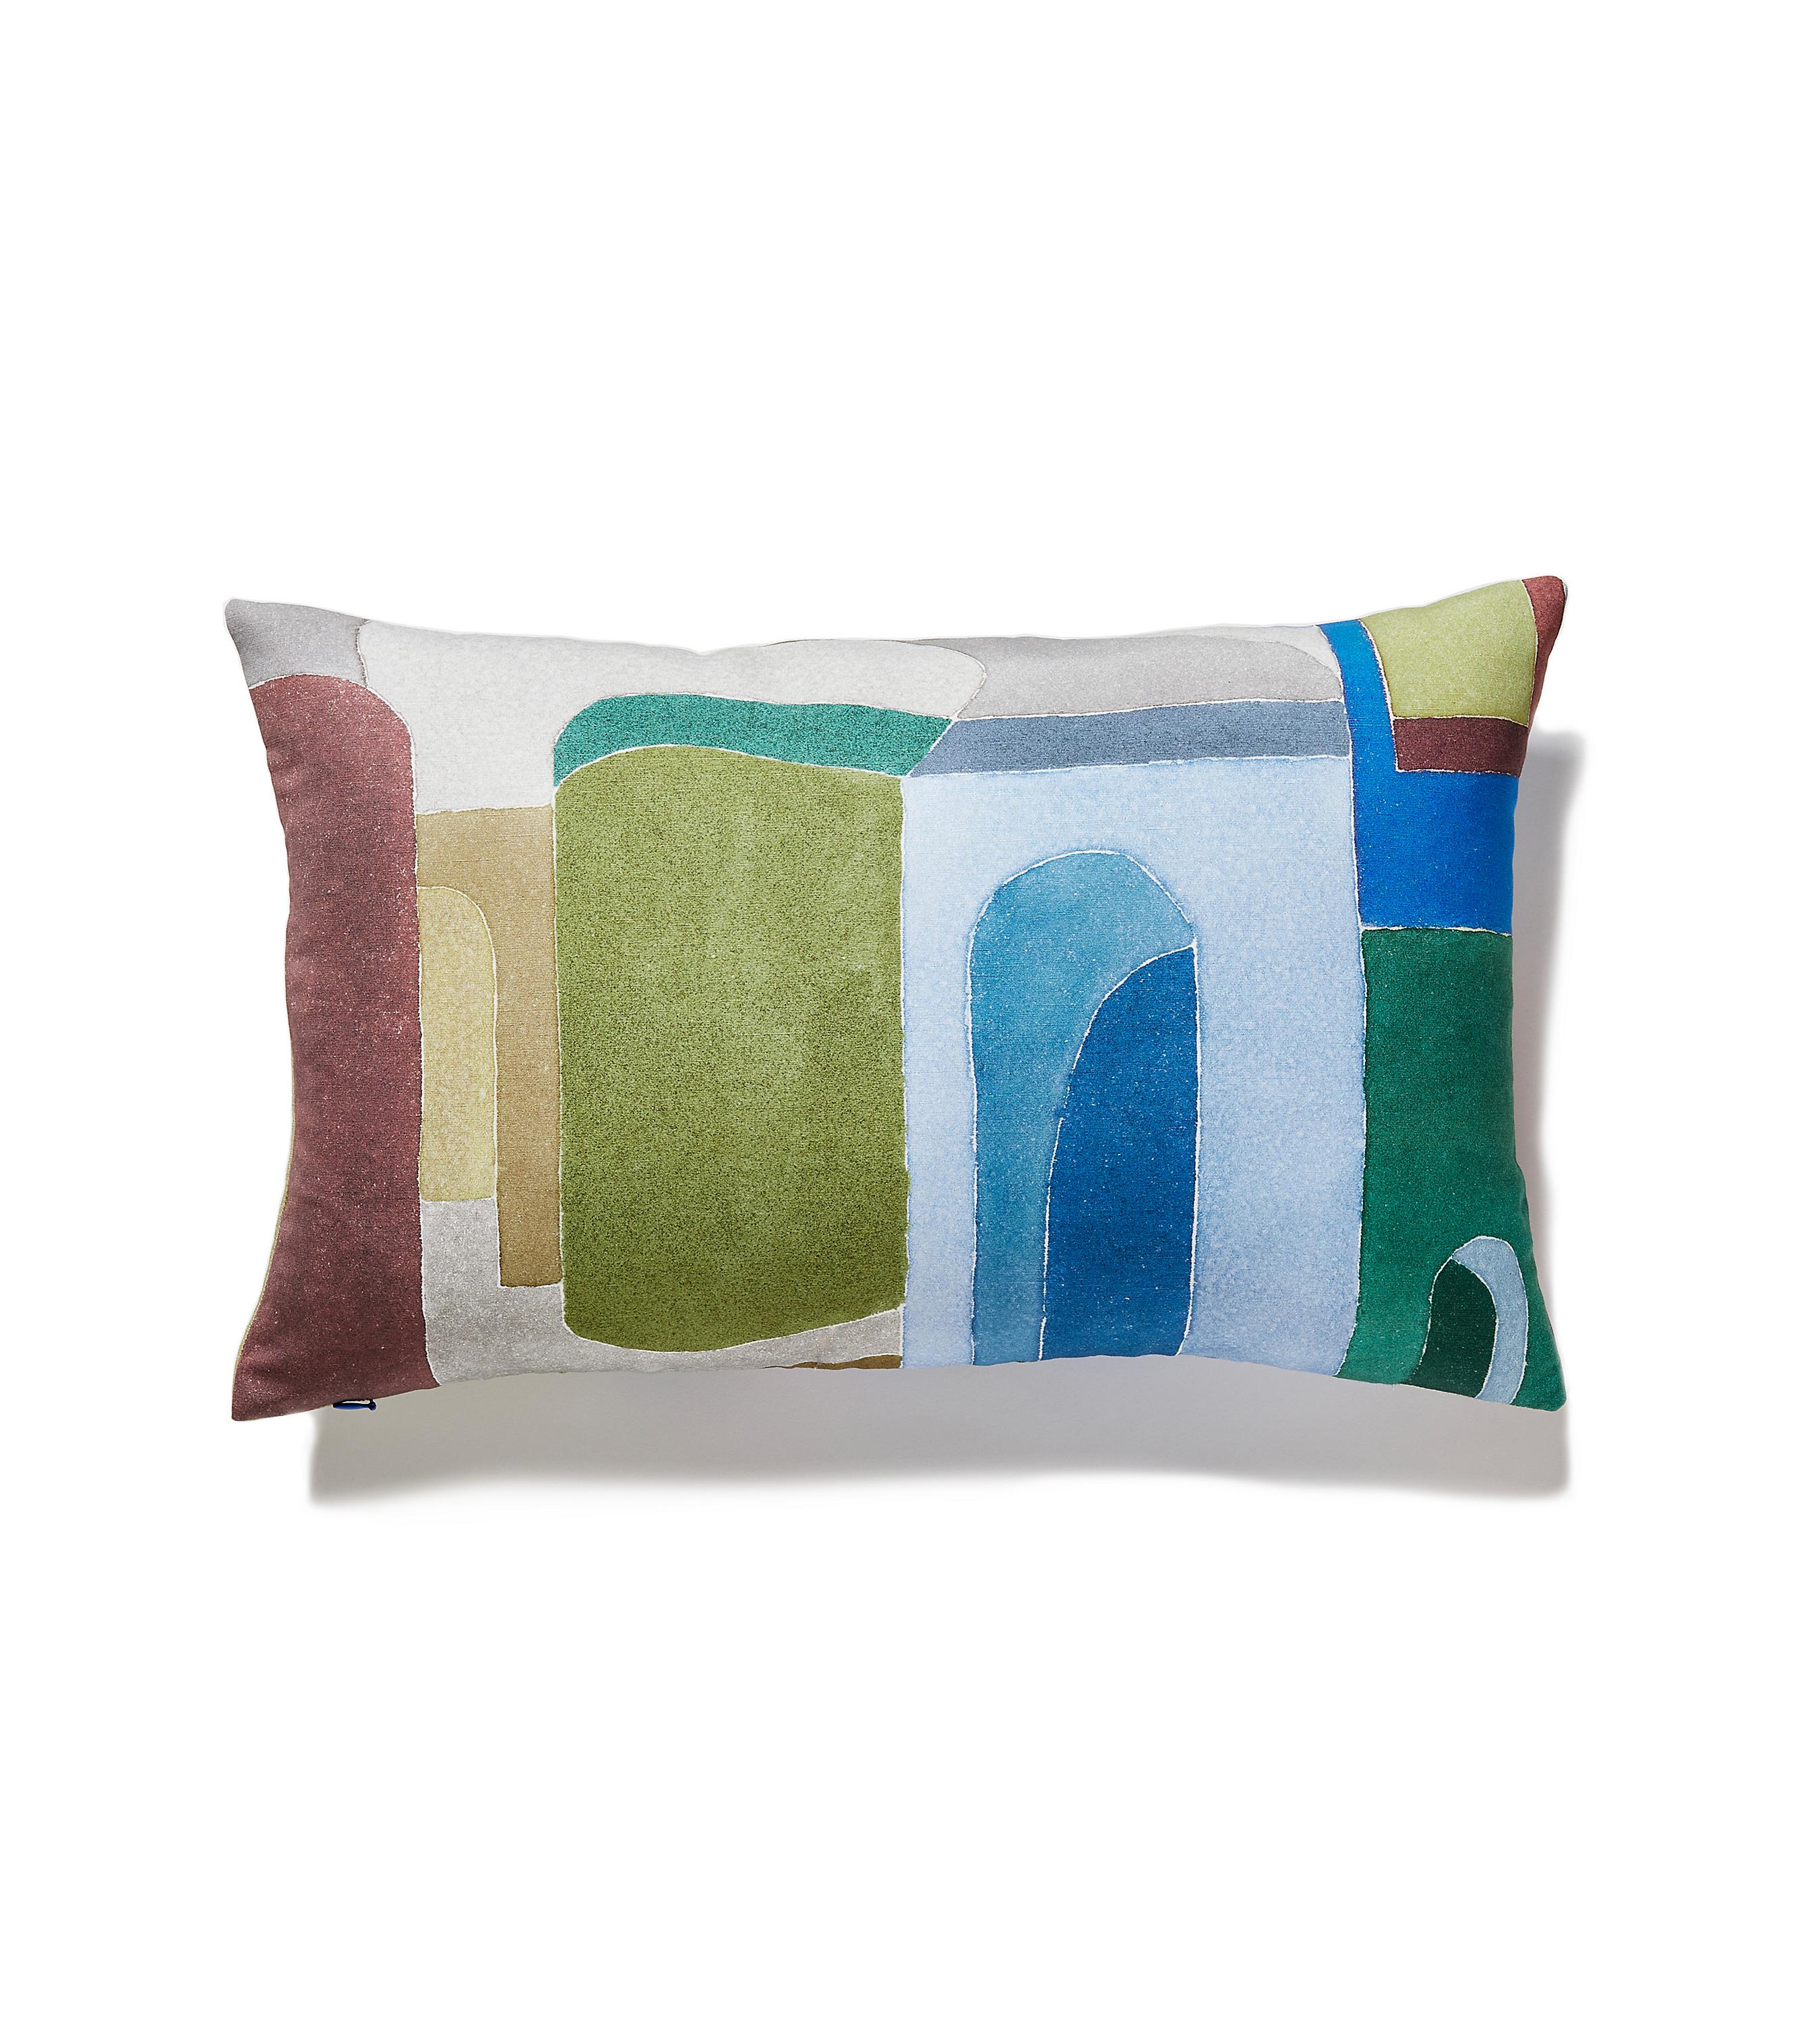 Amp up your space with our fresh mix of plush throw pillows, ready to ship in 3-5 days! While each one looks fabulous on its own, we ascribe to the ‘more is more’ philosophy when it comes to cushions. And with 1,800+ fabrics to shop for both for